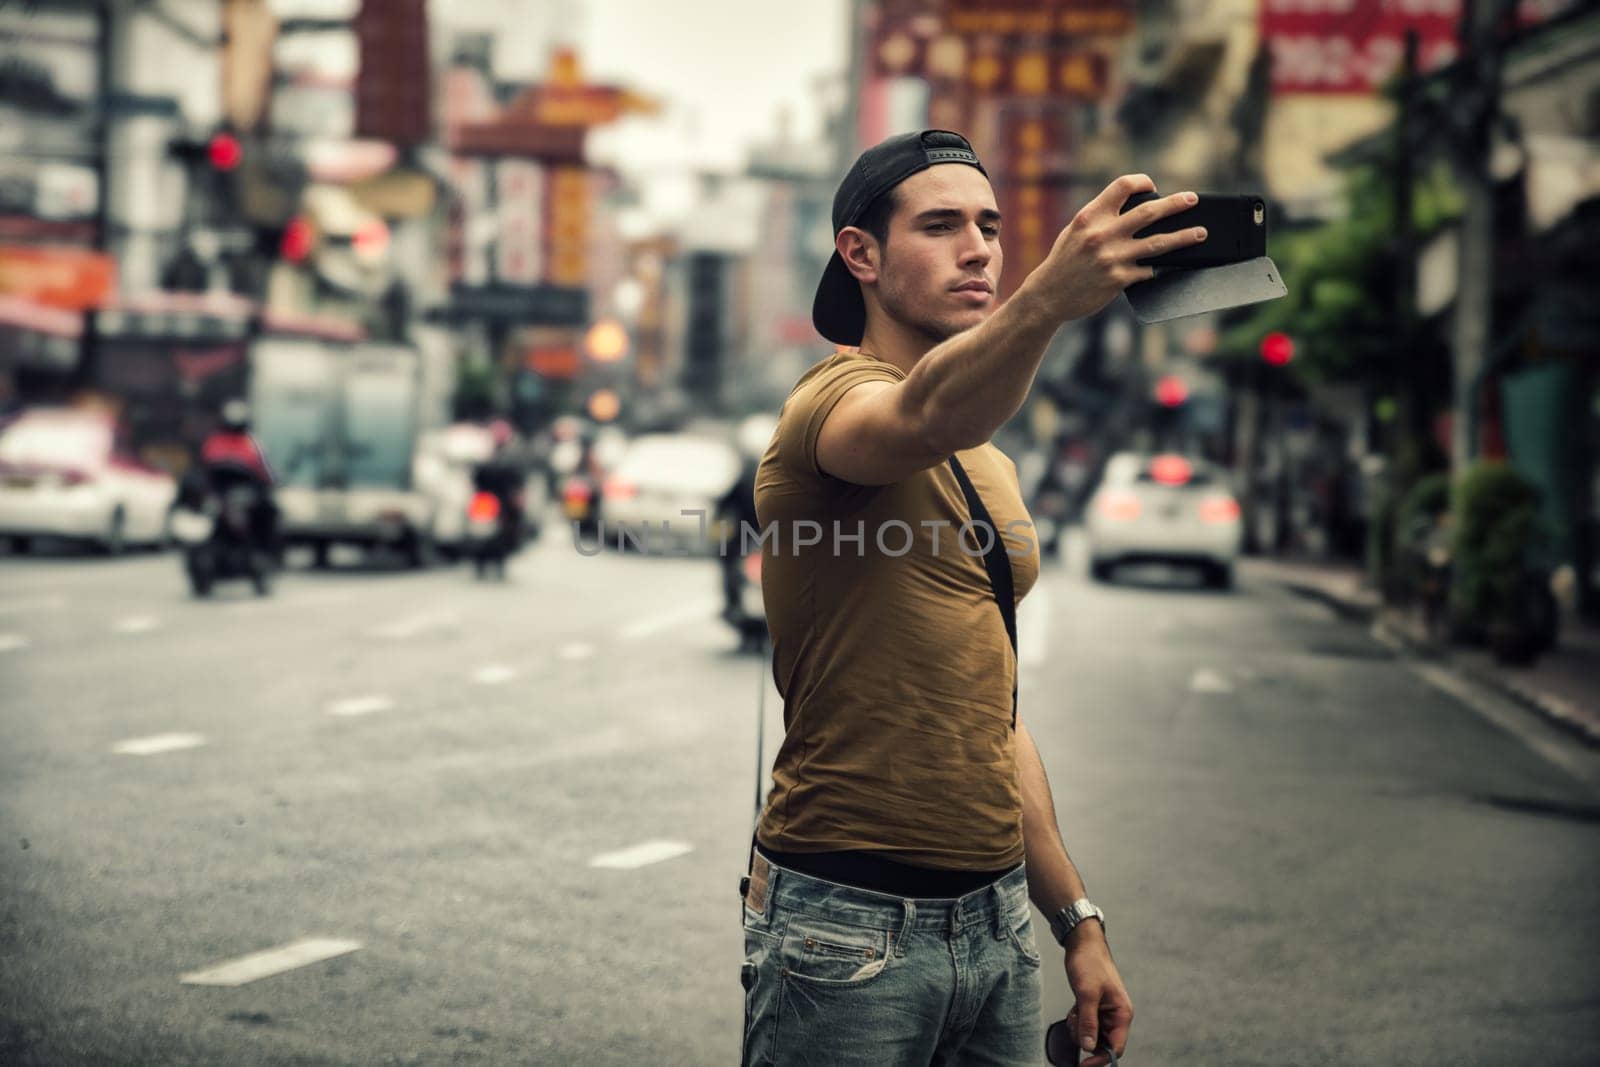 A man taking a selfie on a busy city street. Photo of a man capturing a selfie amidst the vibrant hustle and bustle of a bustling city street in Thailand